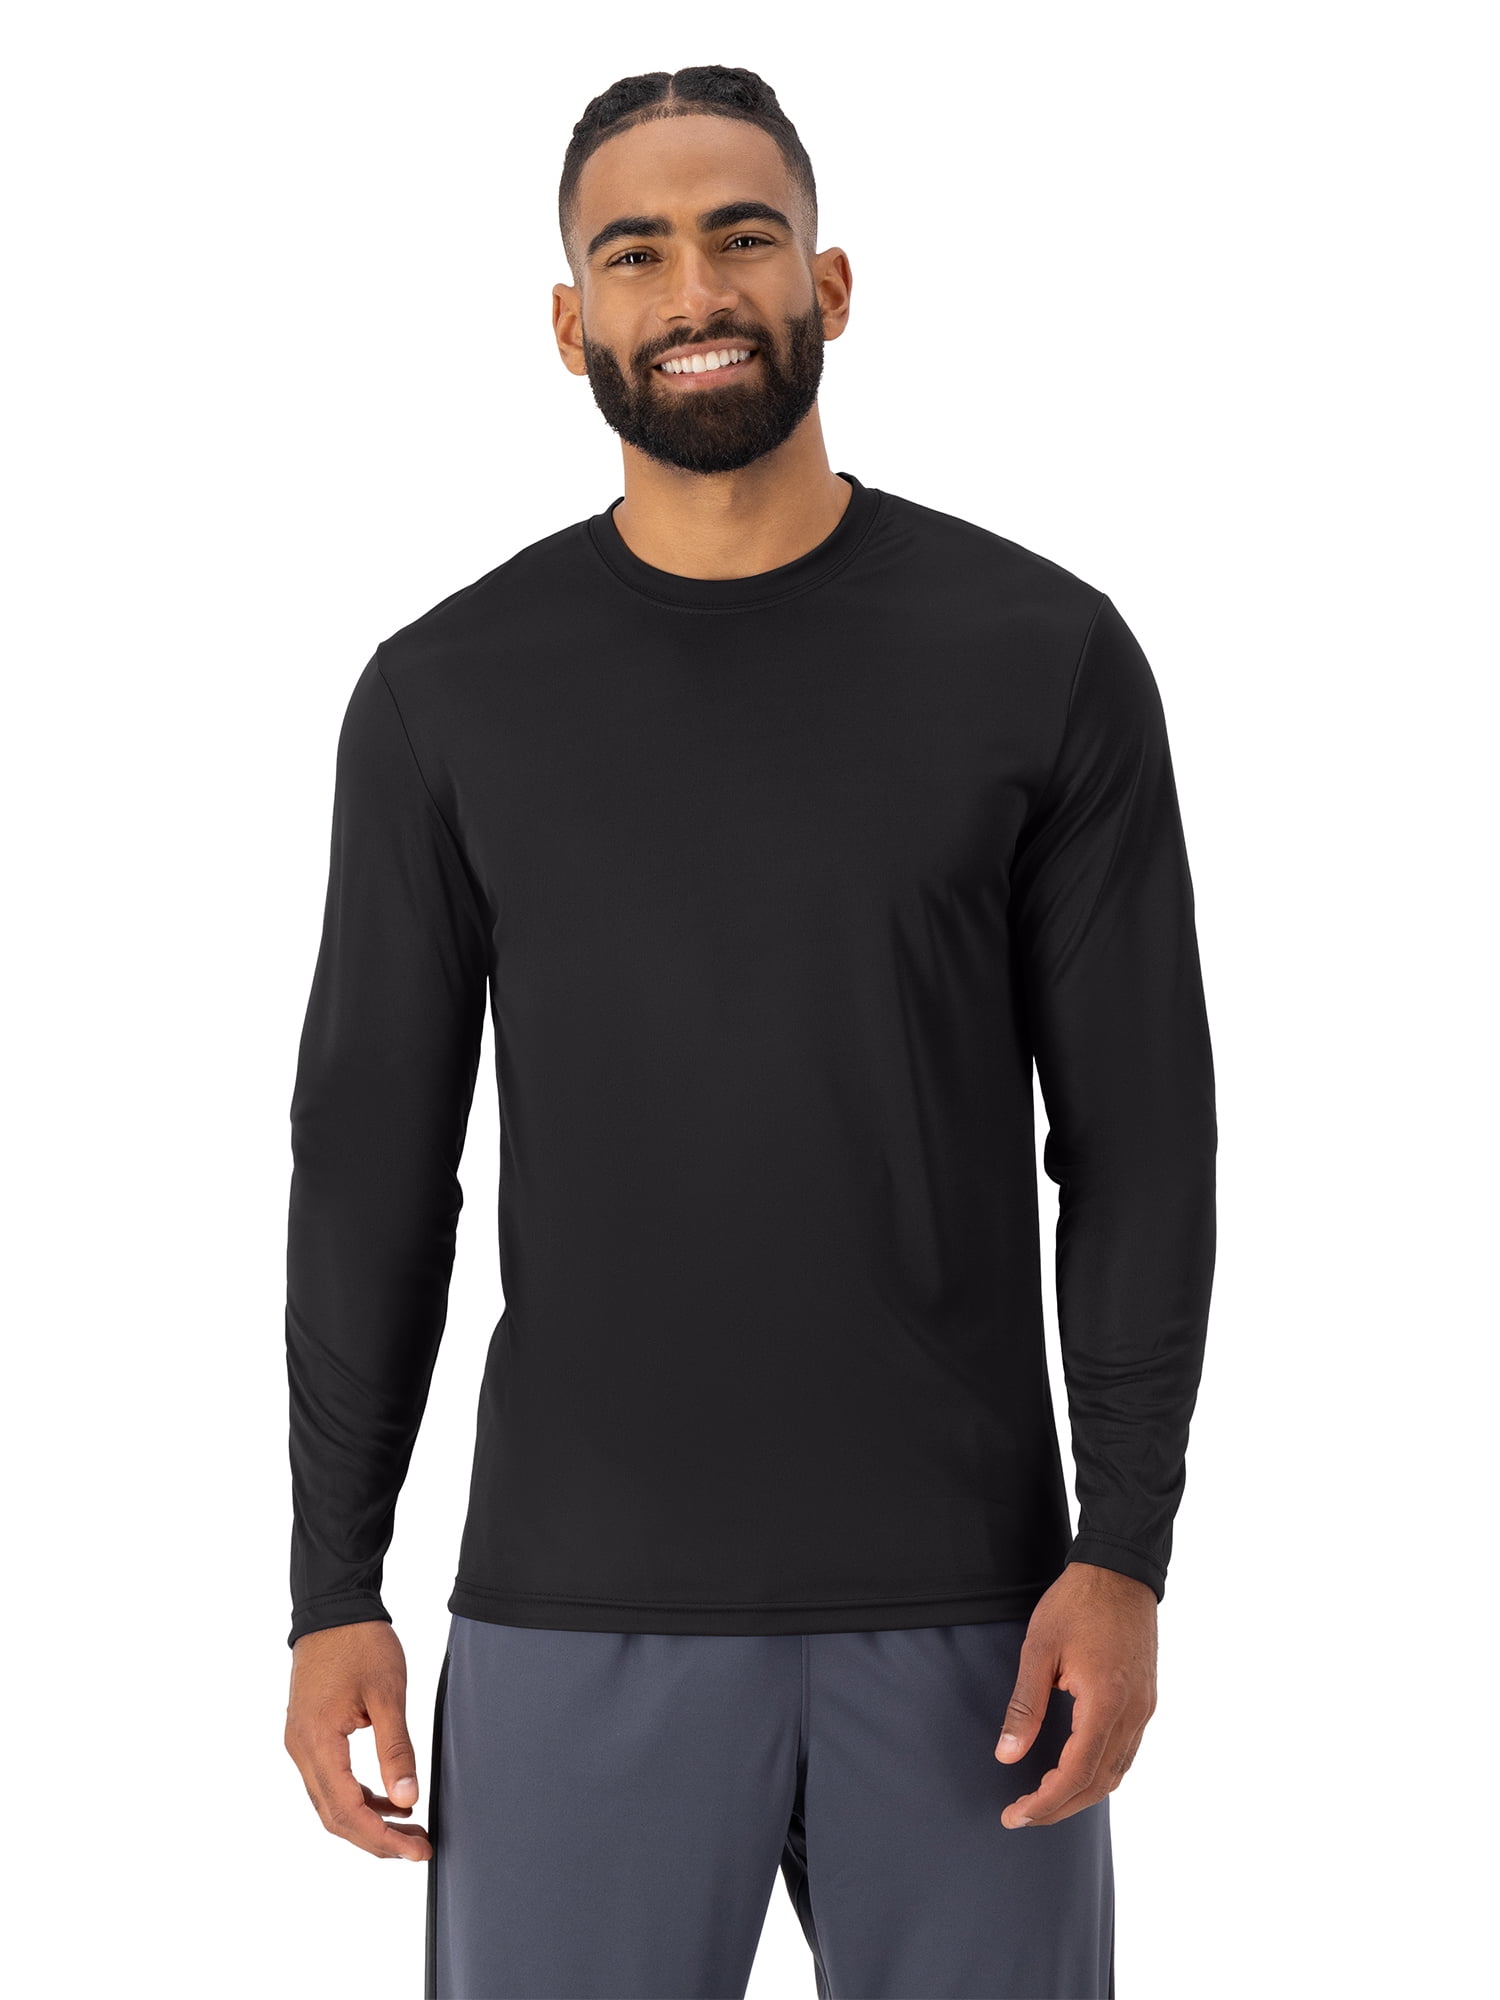 Hanes Men's and Big Men's Cool Dri Performance Long Sleeve T-Shirt (40+  UPF), Up to Size 3XL 